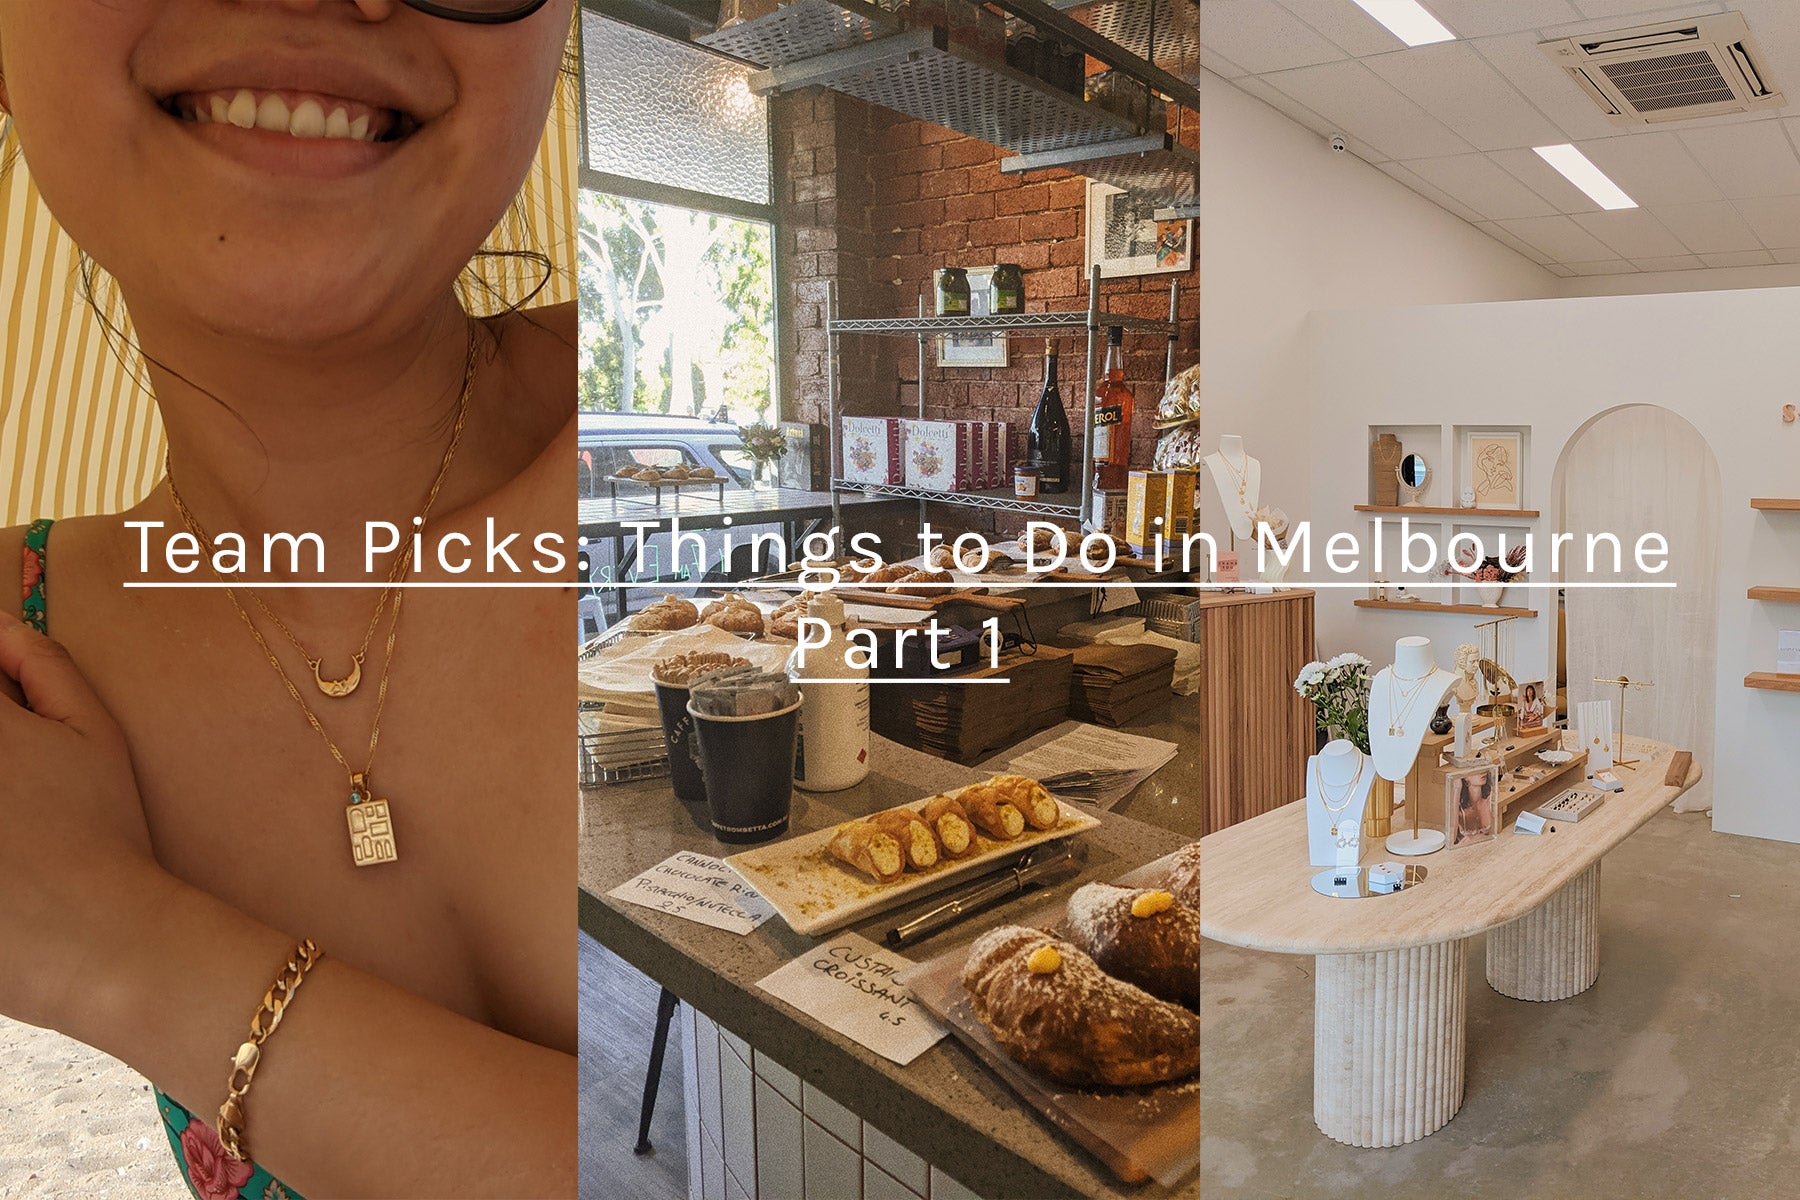 Our Team Picks: Things to Do In Melbourne